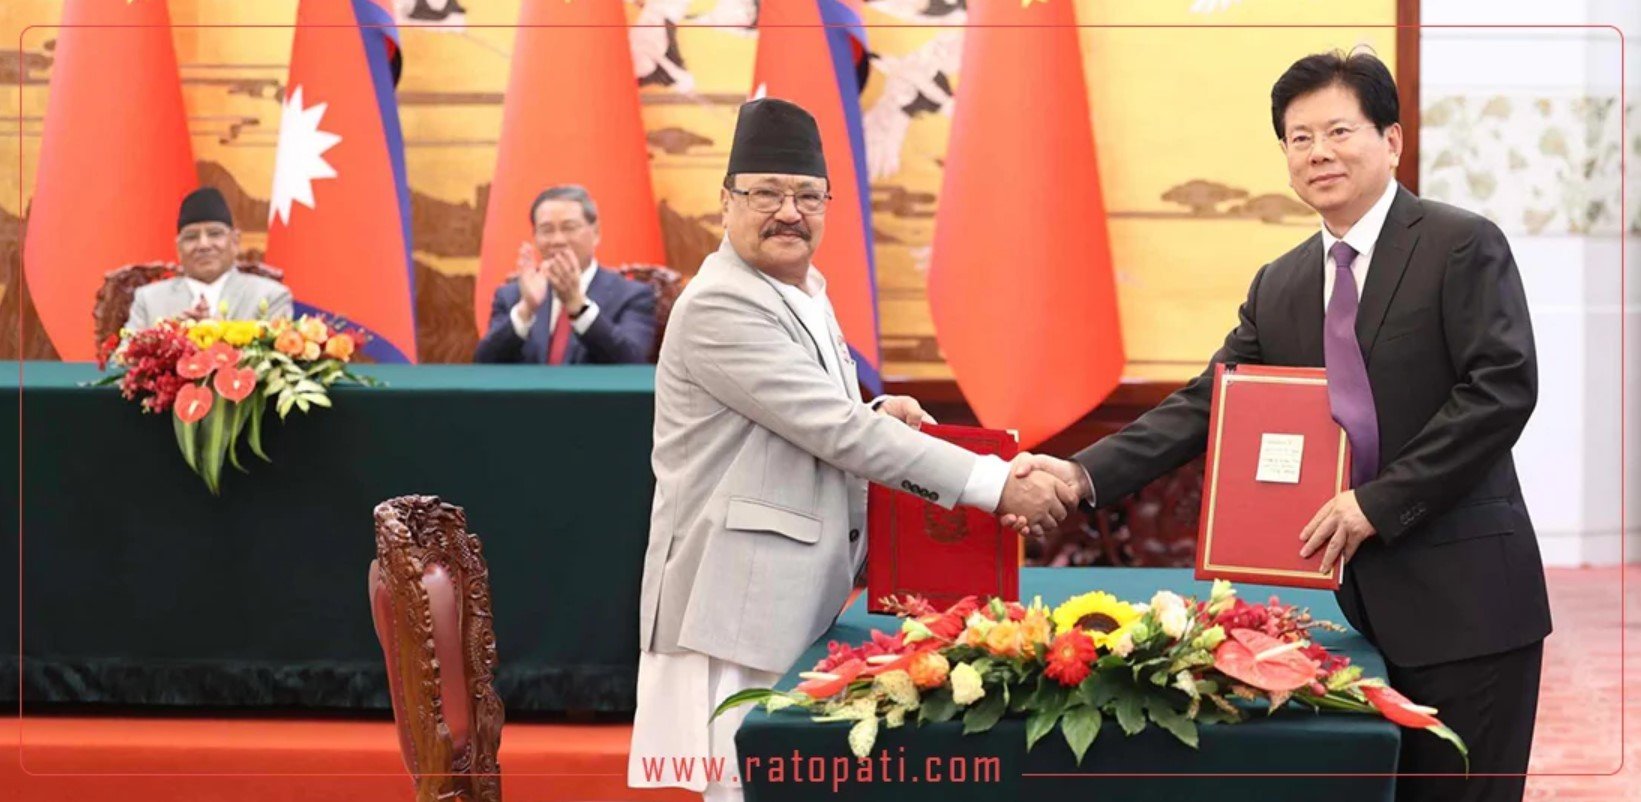 These are the bilateral agreements between China and Nepal